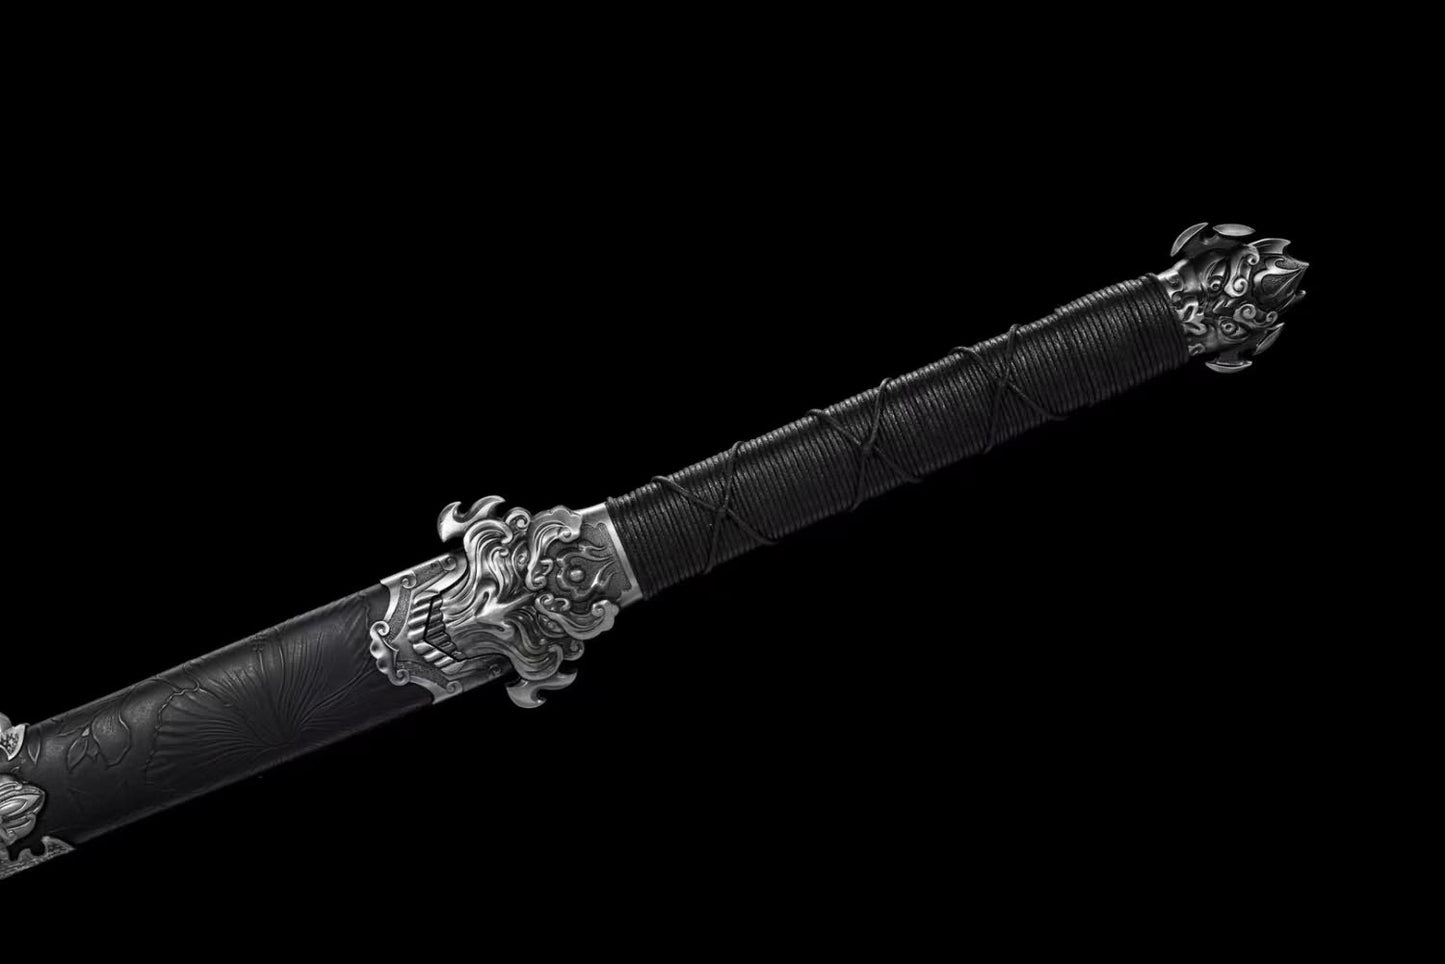 Longquan Sword Real Forged High Carbon Steel Blade,Alloy Fittings,PU Scabbard